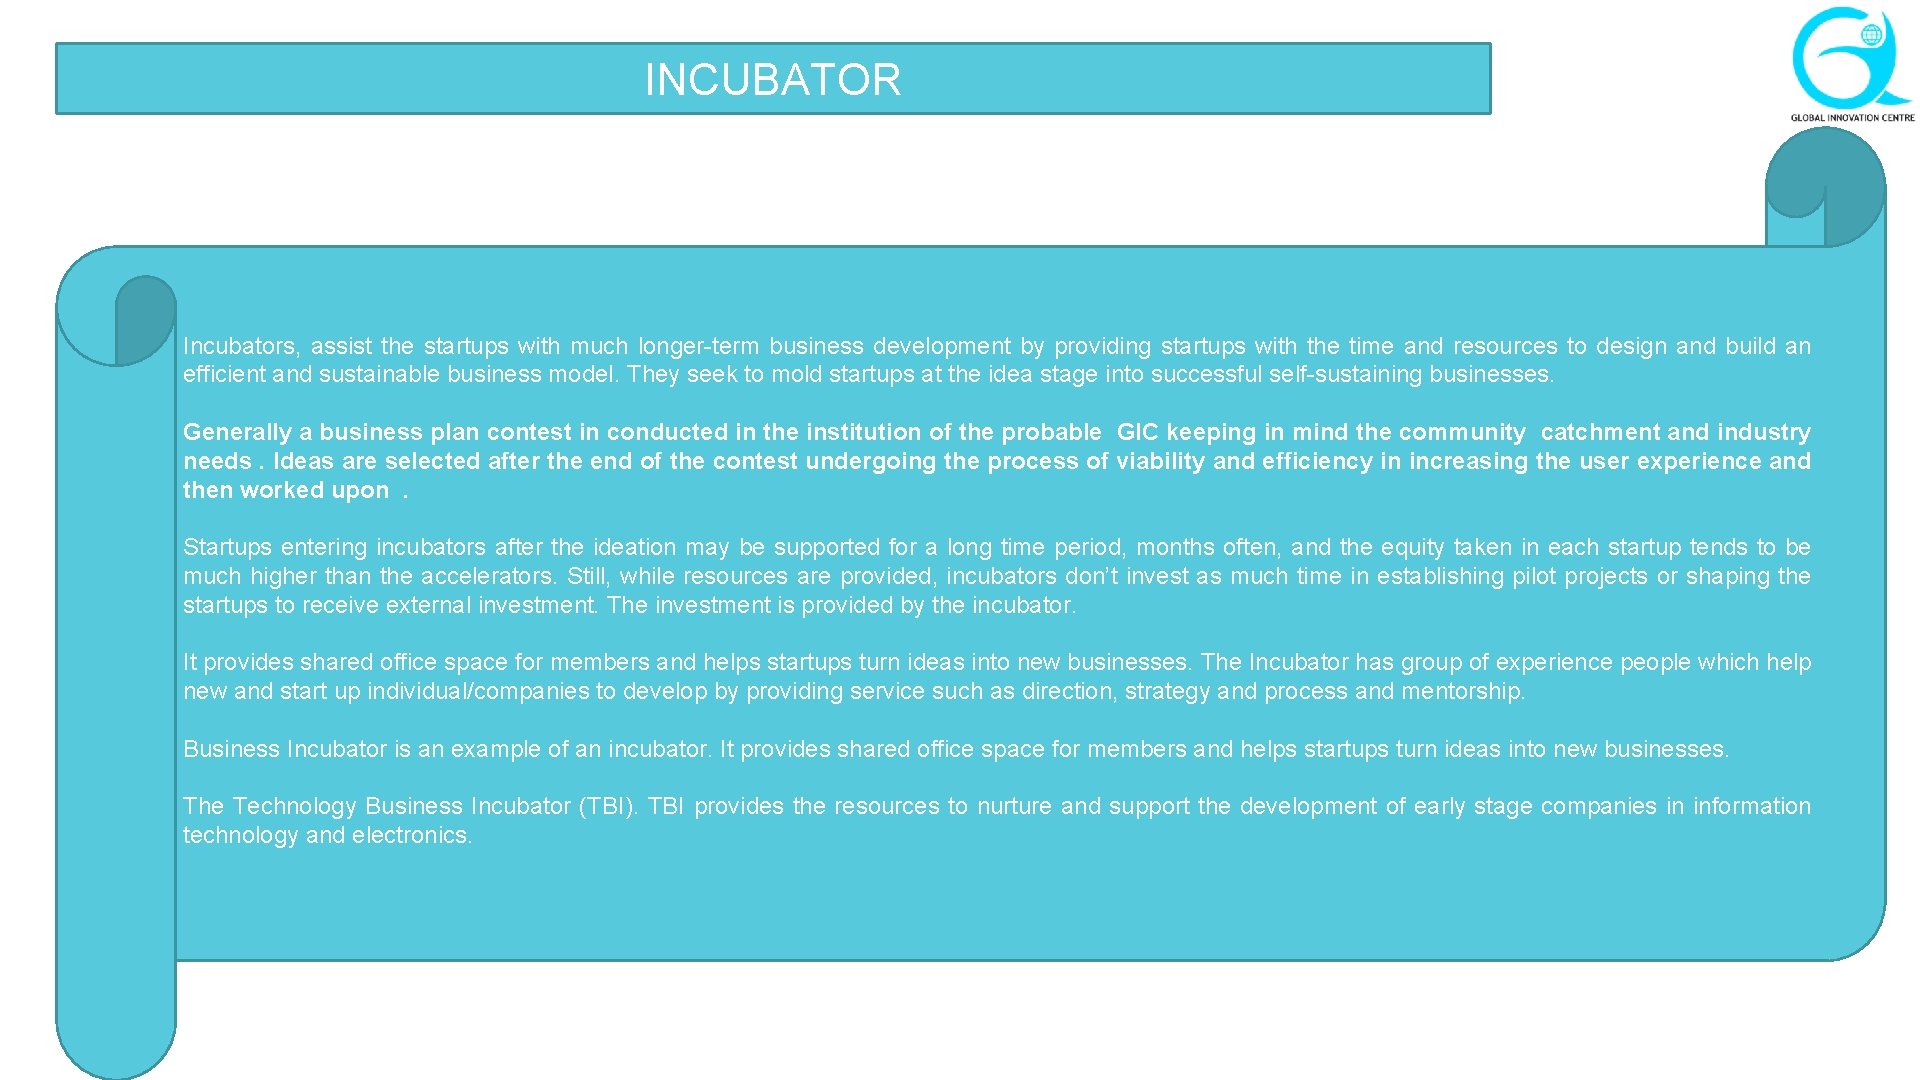 INCUBATOR Incubators, assist the startups with much longer-term business development by providing startups with